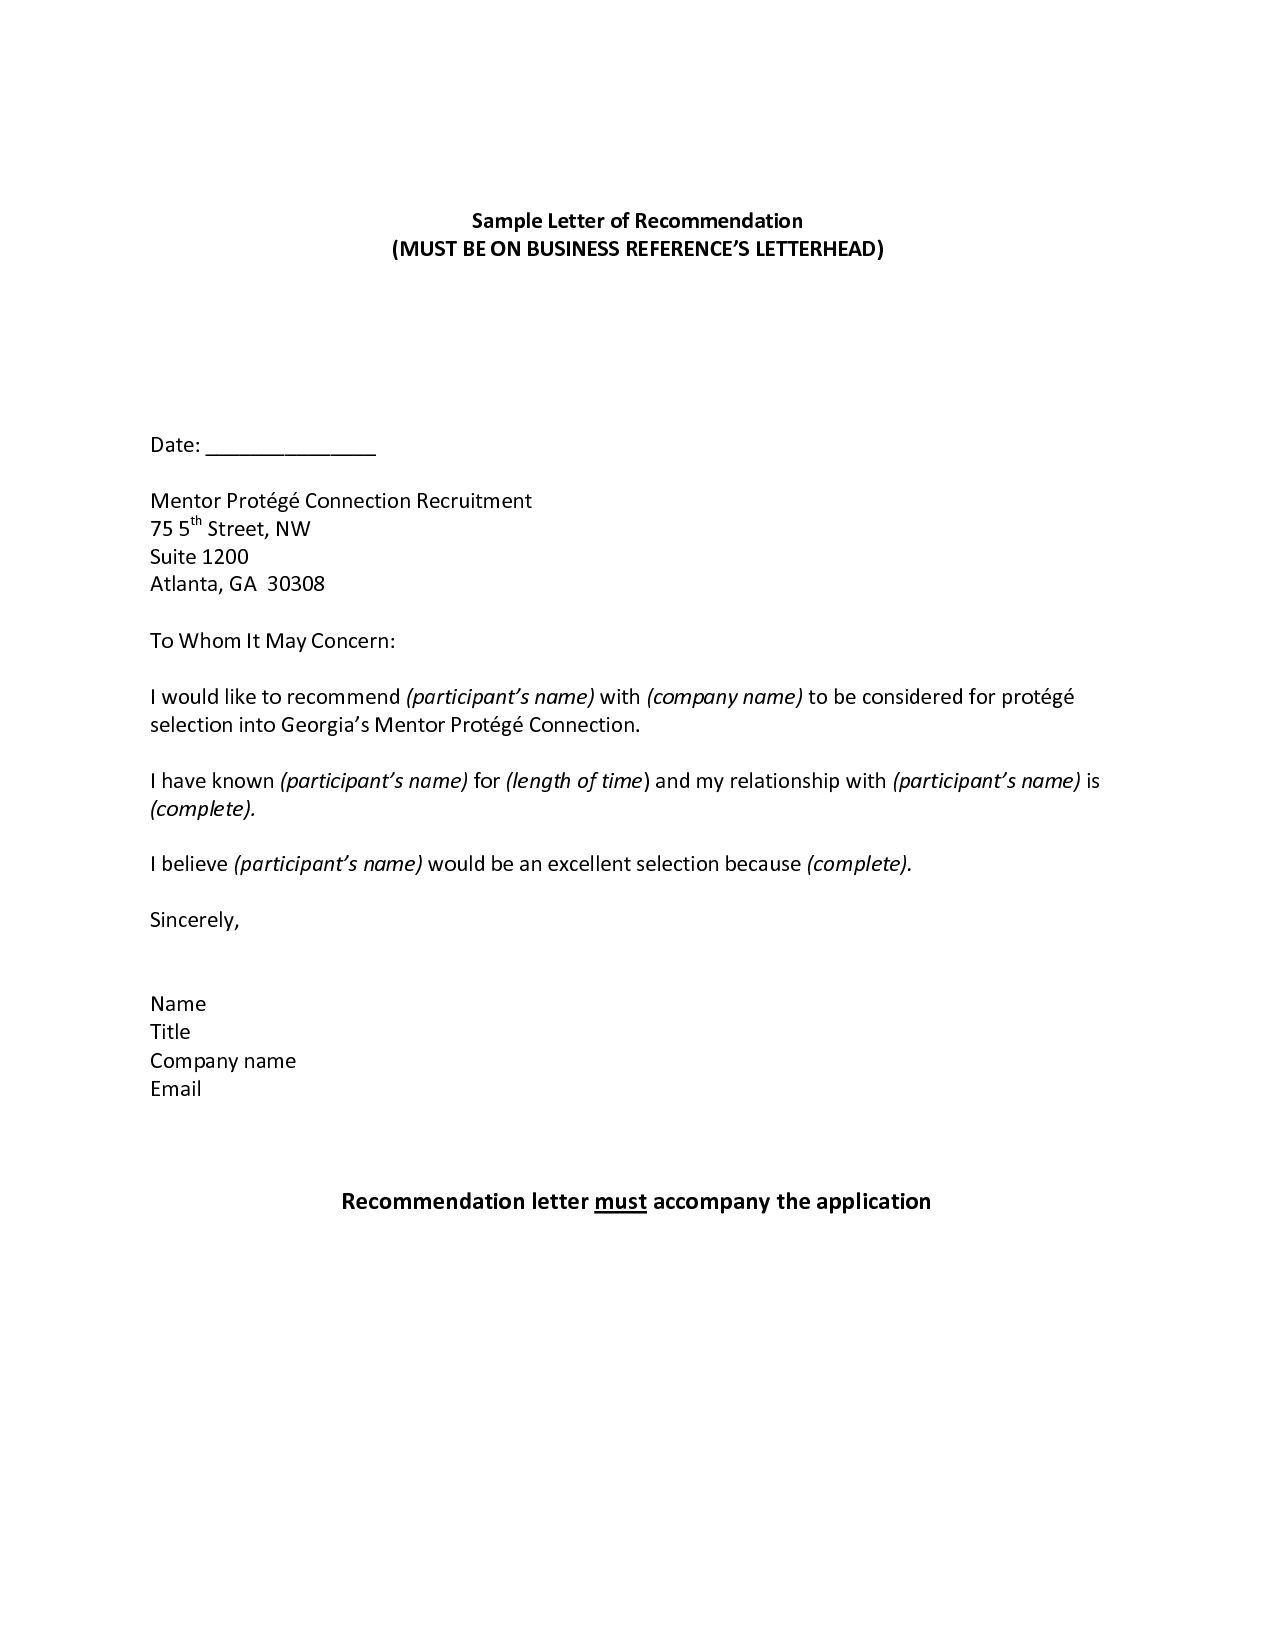 Professional Reference Sample Recommendation Letter Jos regarding dimensions 1275 X 1650